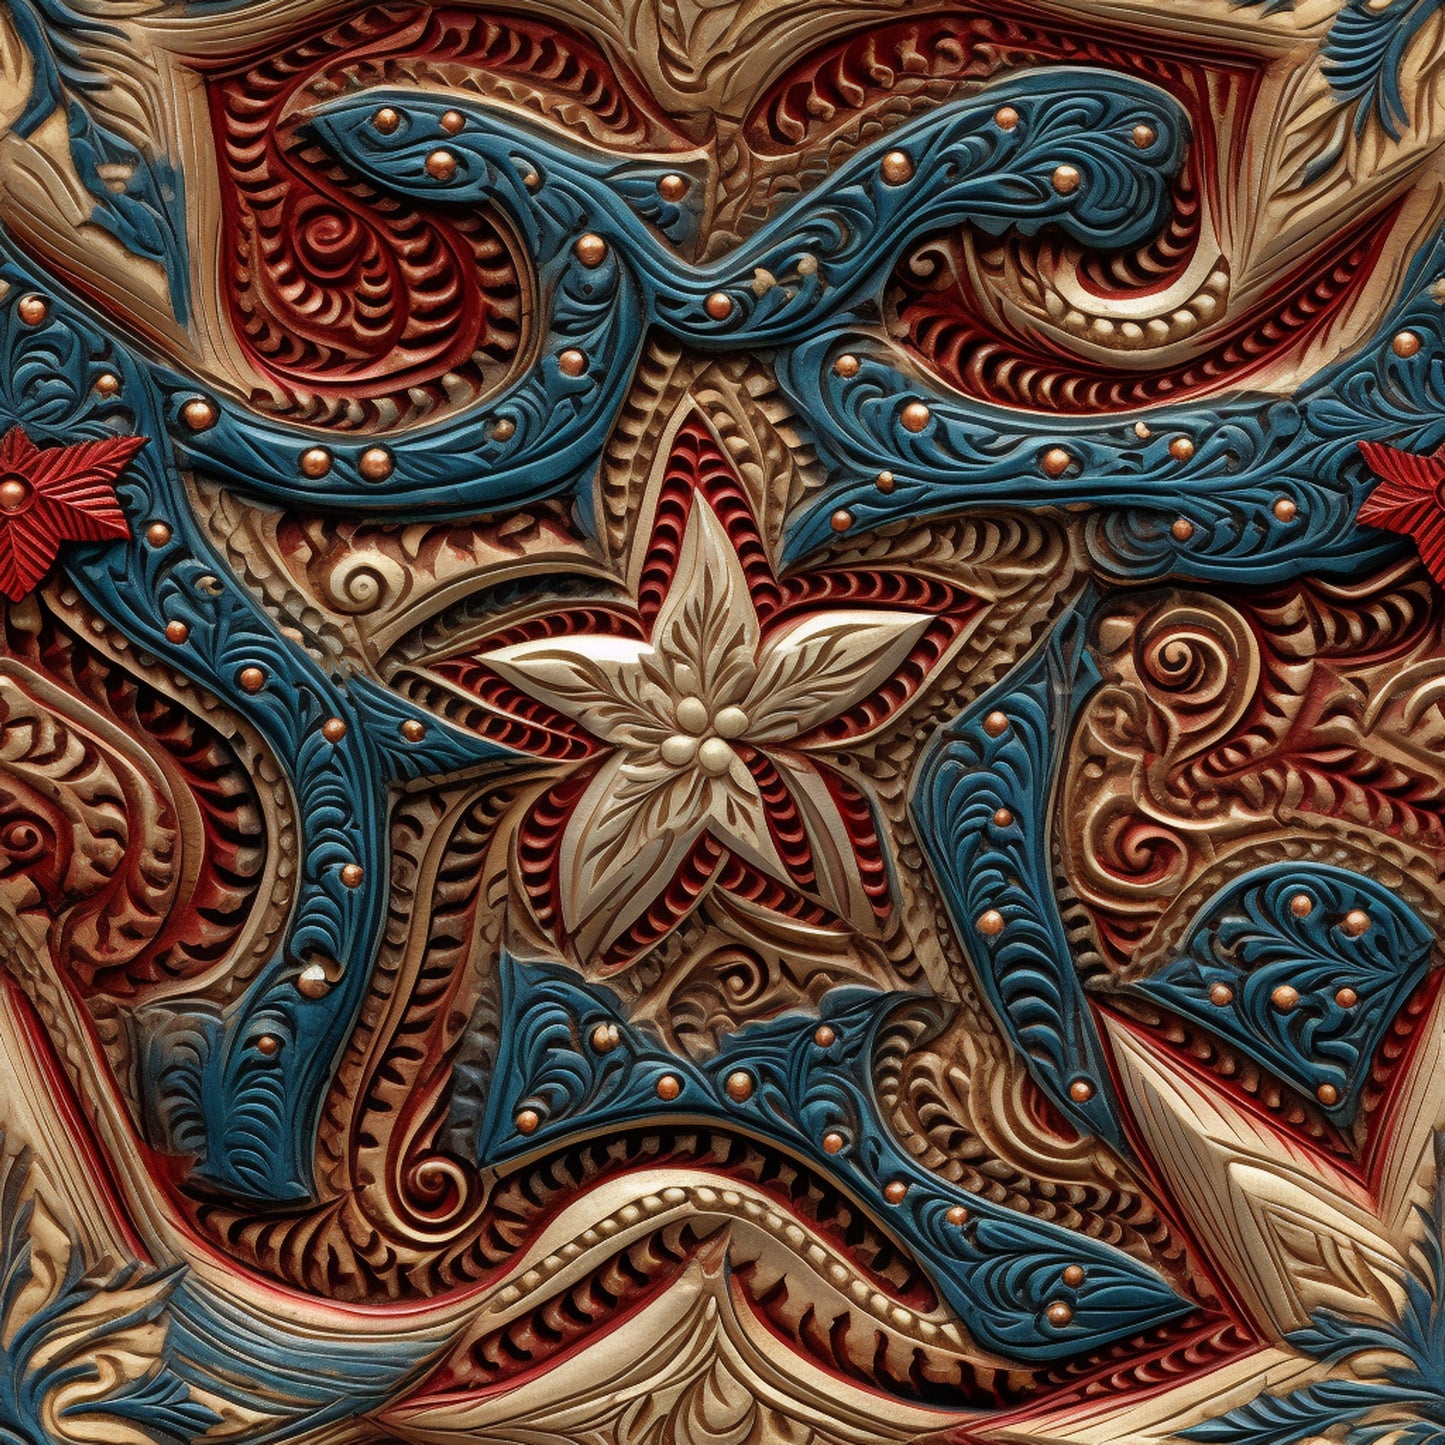 RED WHITE AND BLUE CARVED WOOD  - MULTIPLE VARIATIONS